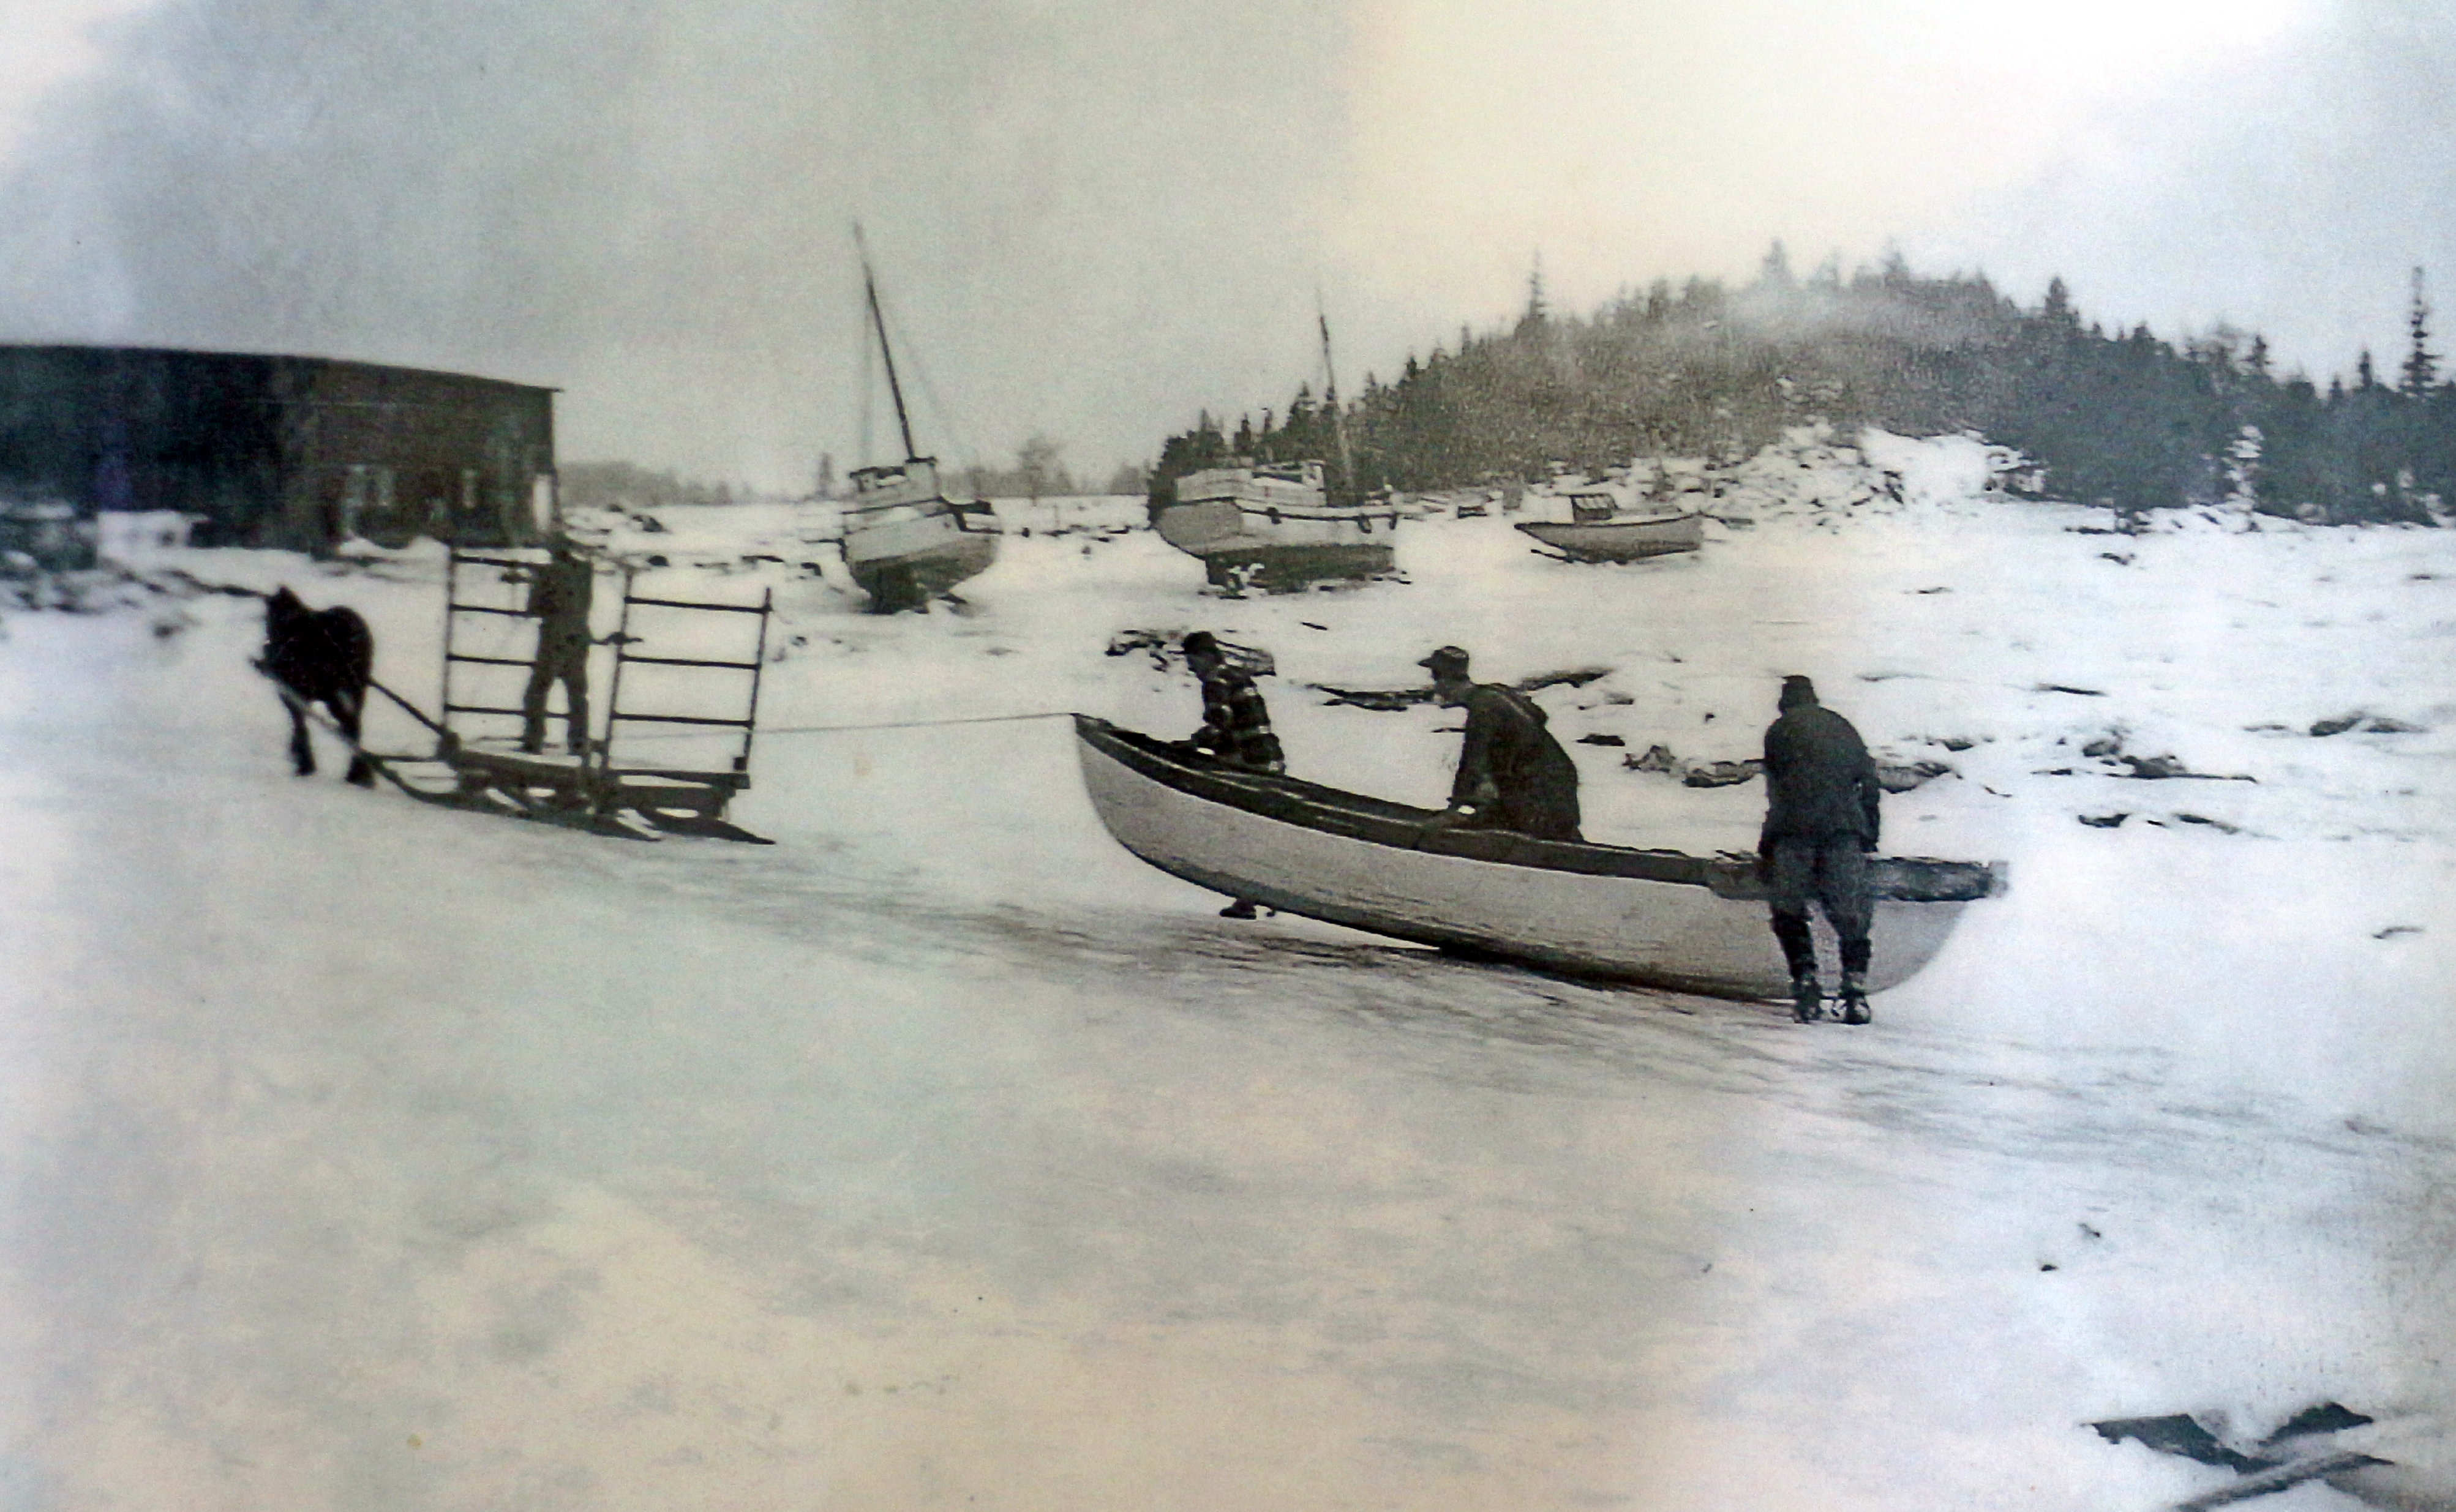 Black and white photograph where three men push a rowboat on the snowy shore. The boat is tied behind a sledge pulled by a horse on which stands a coachman. In the background are a building and three sailboats on the shore.